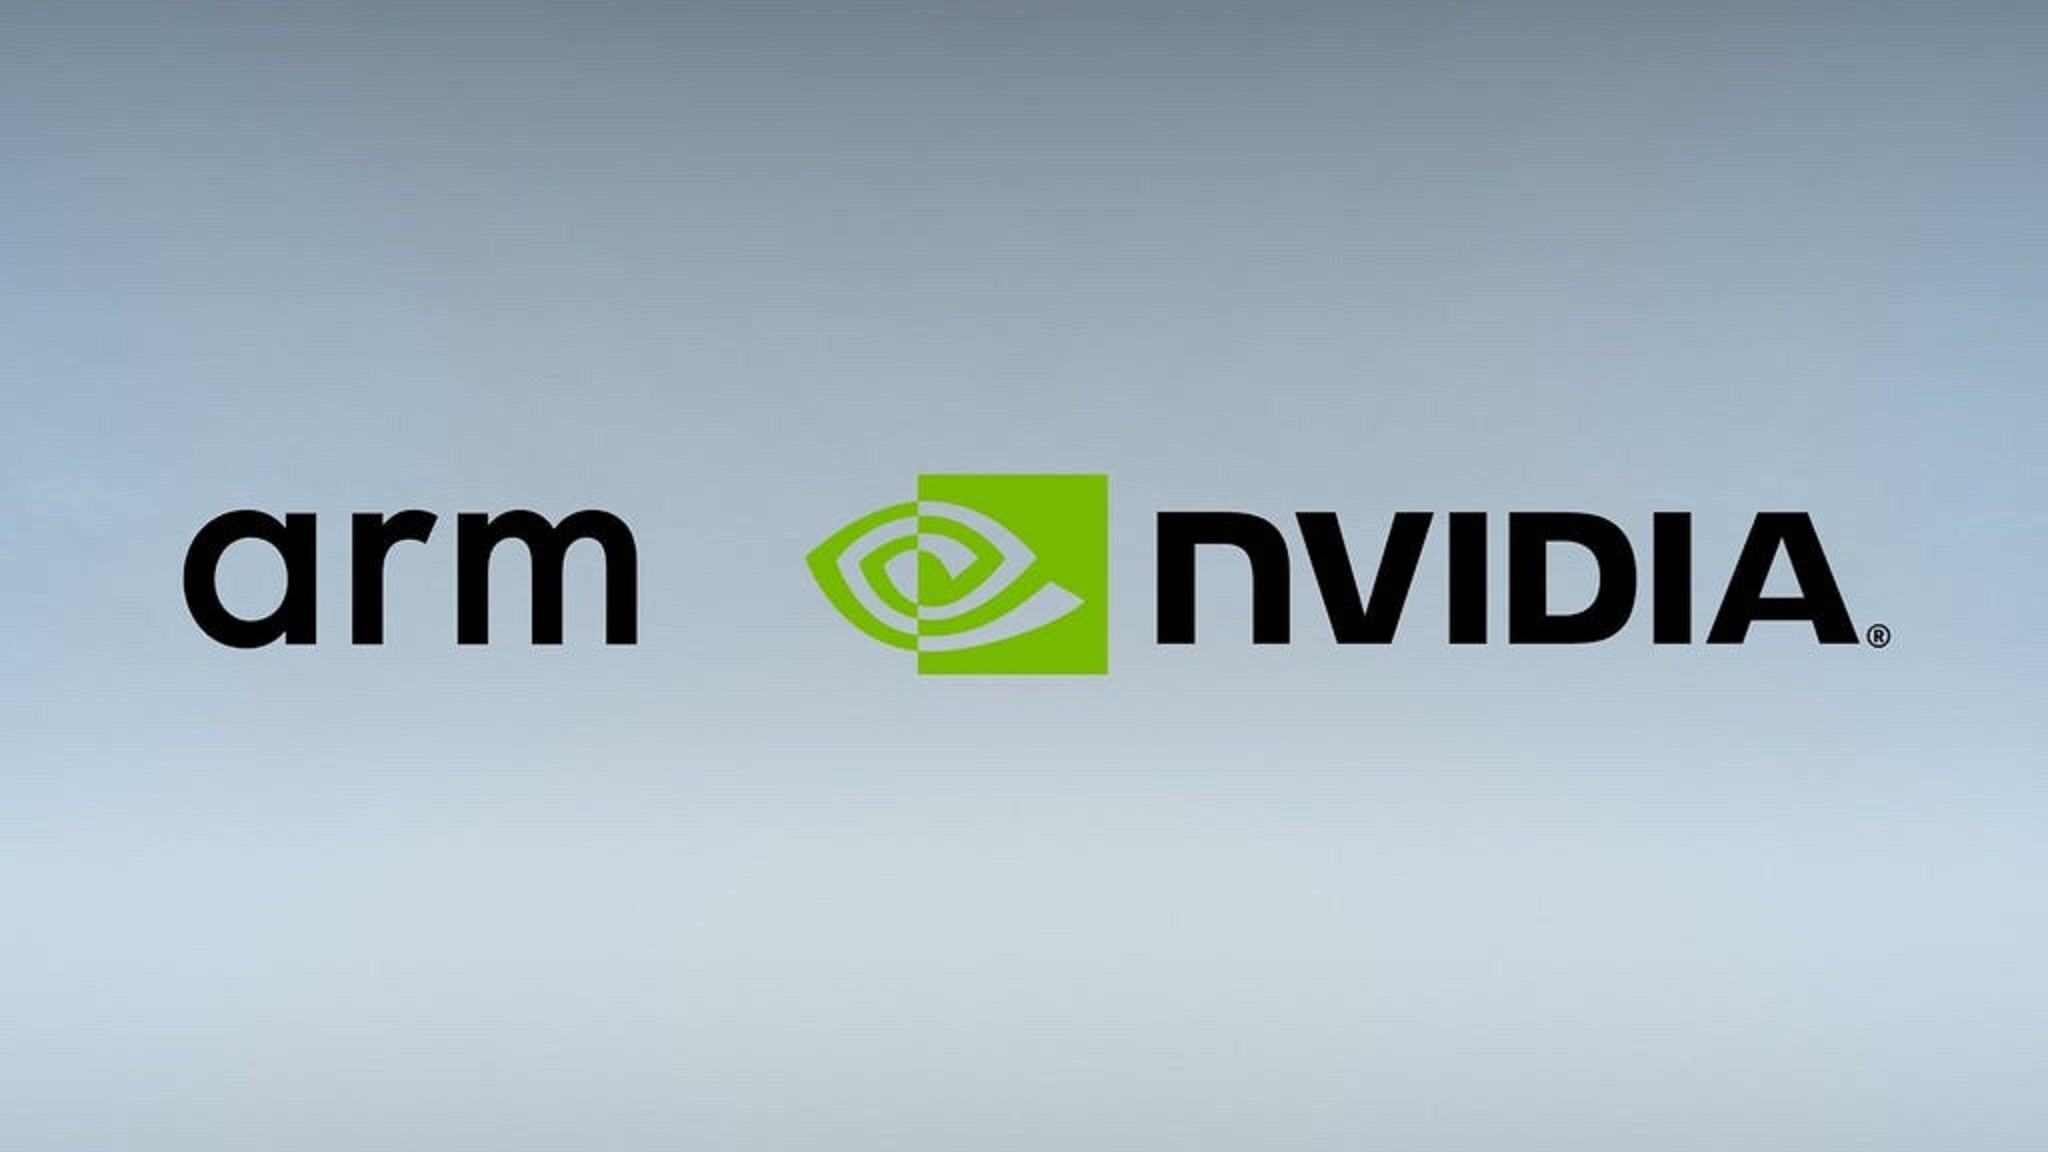 Oliver Dowden has ordered the competition watchdog to begin a ‘phase one’ investigation of the deal (Arm/Nvidia)